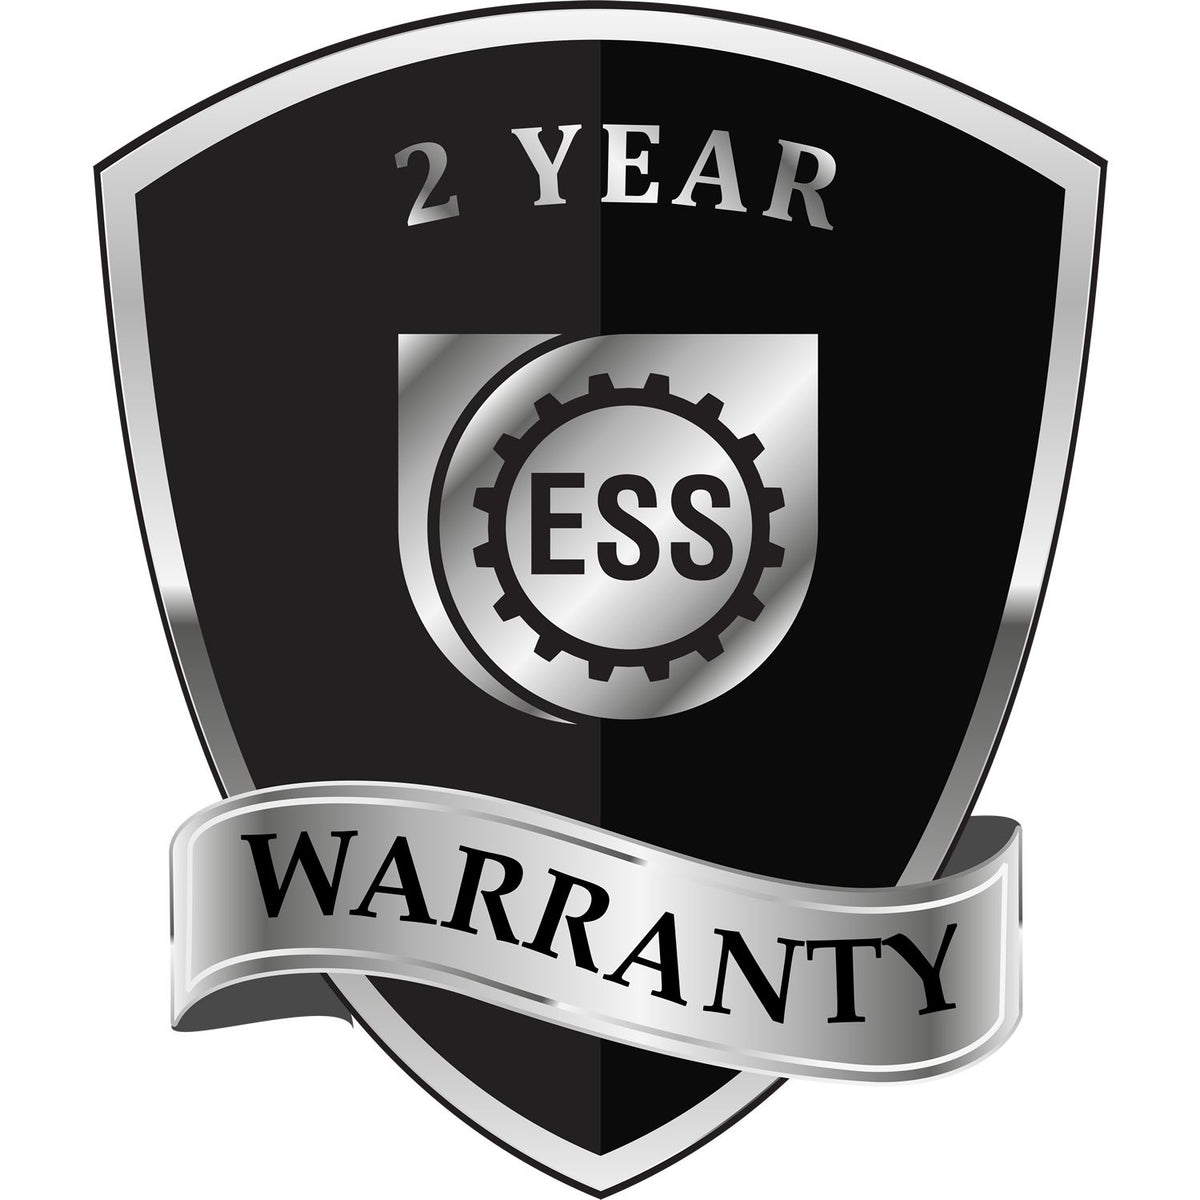 A badge or emblem showing a warranty icon for the Soft Virginia Professional Engineer Seal